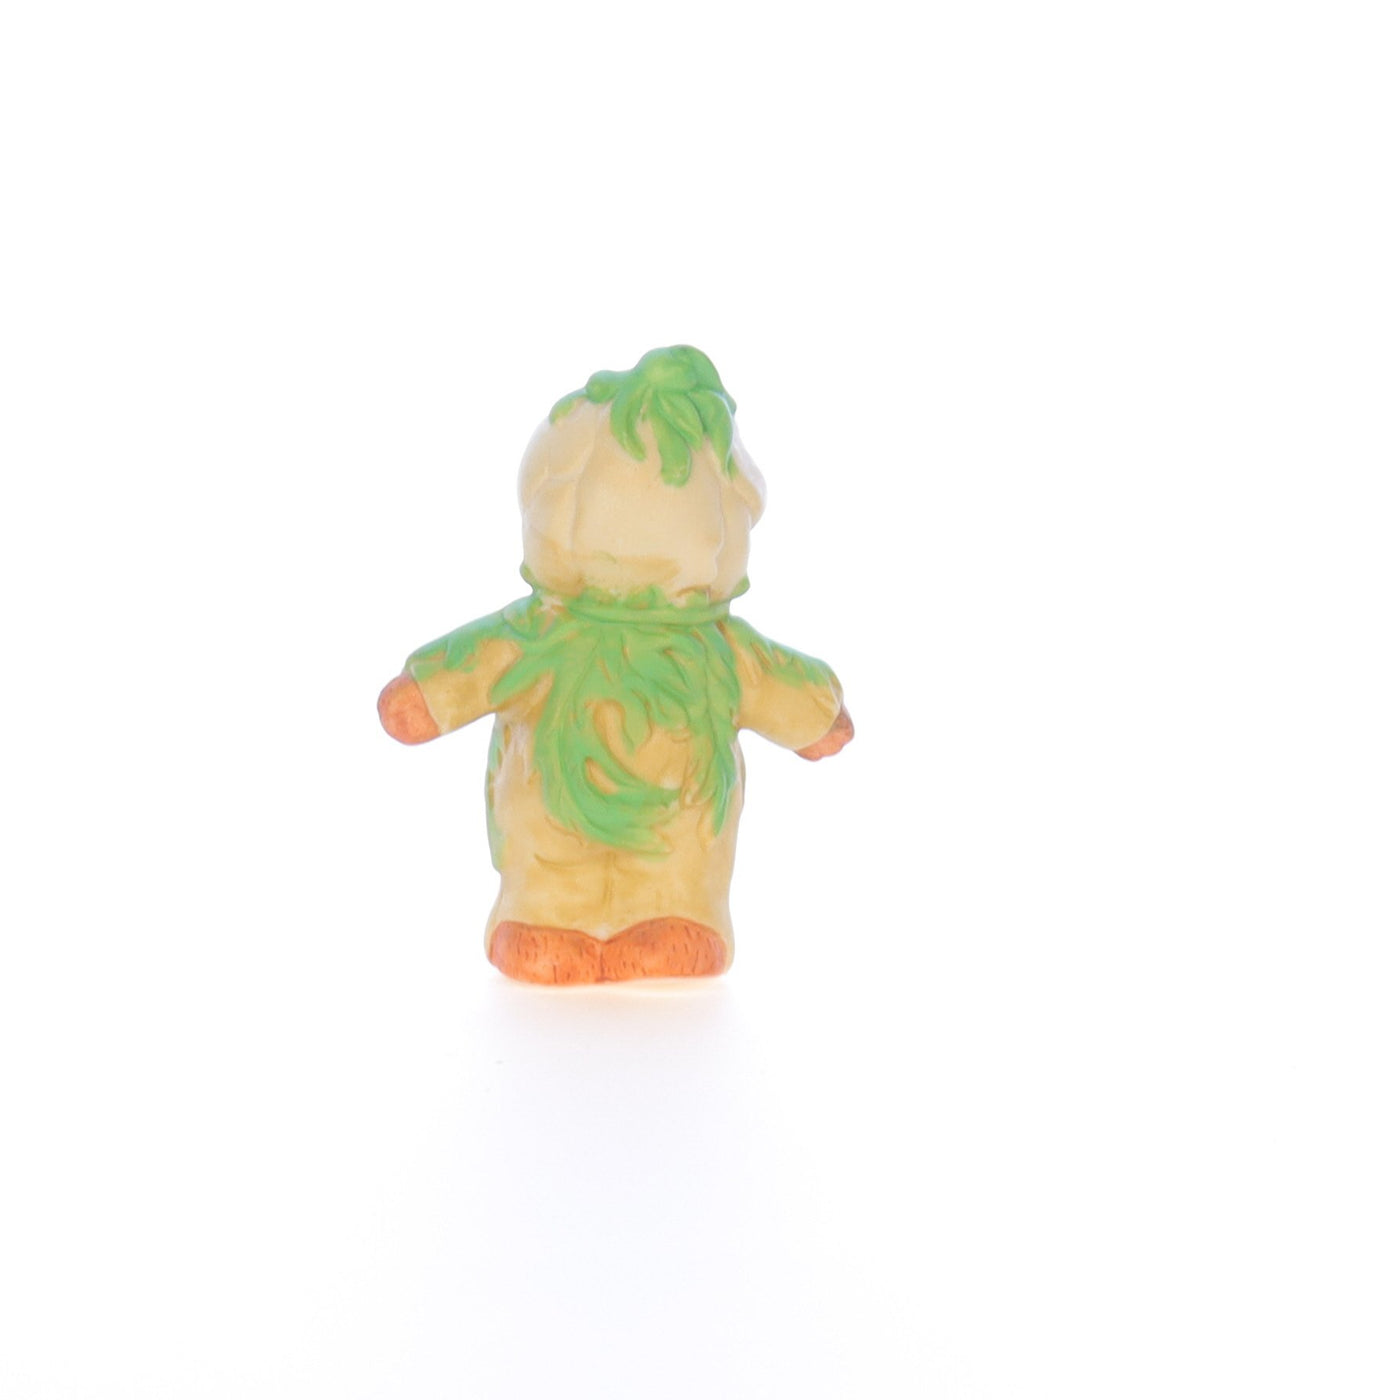 Lucy_And_Me_by_Lucy_Atwell_Porcelain_Figurine_Bear_with_Green_Flower_Costume_Lucy_Unknown_013_05